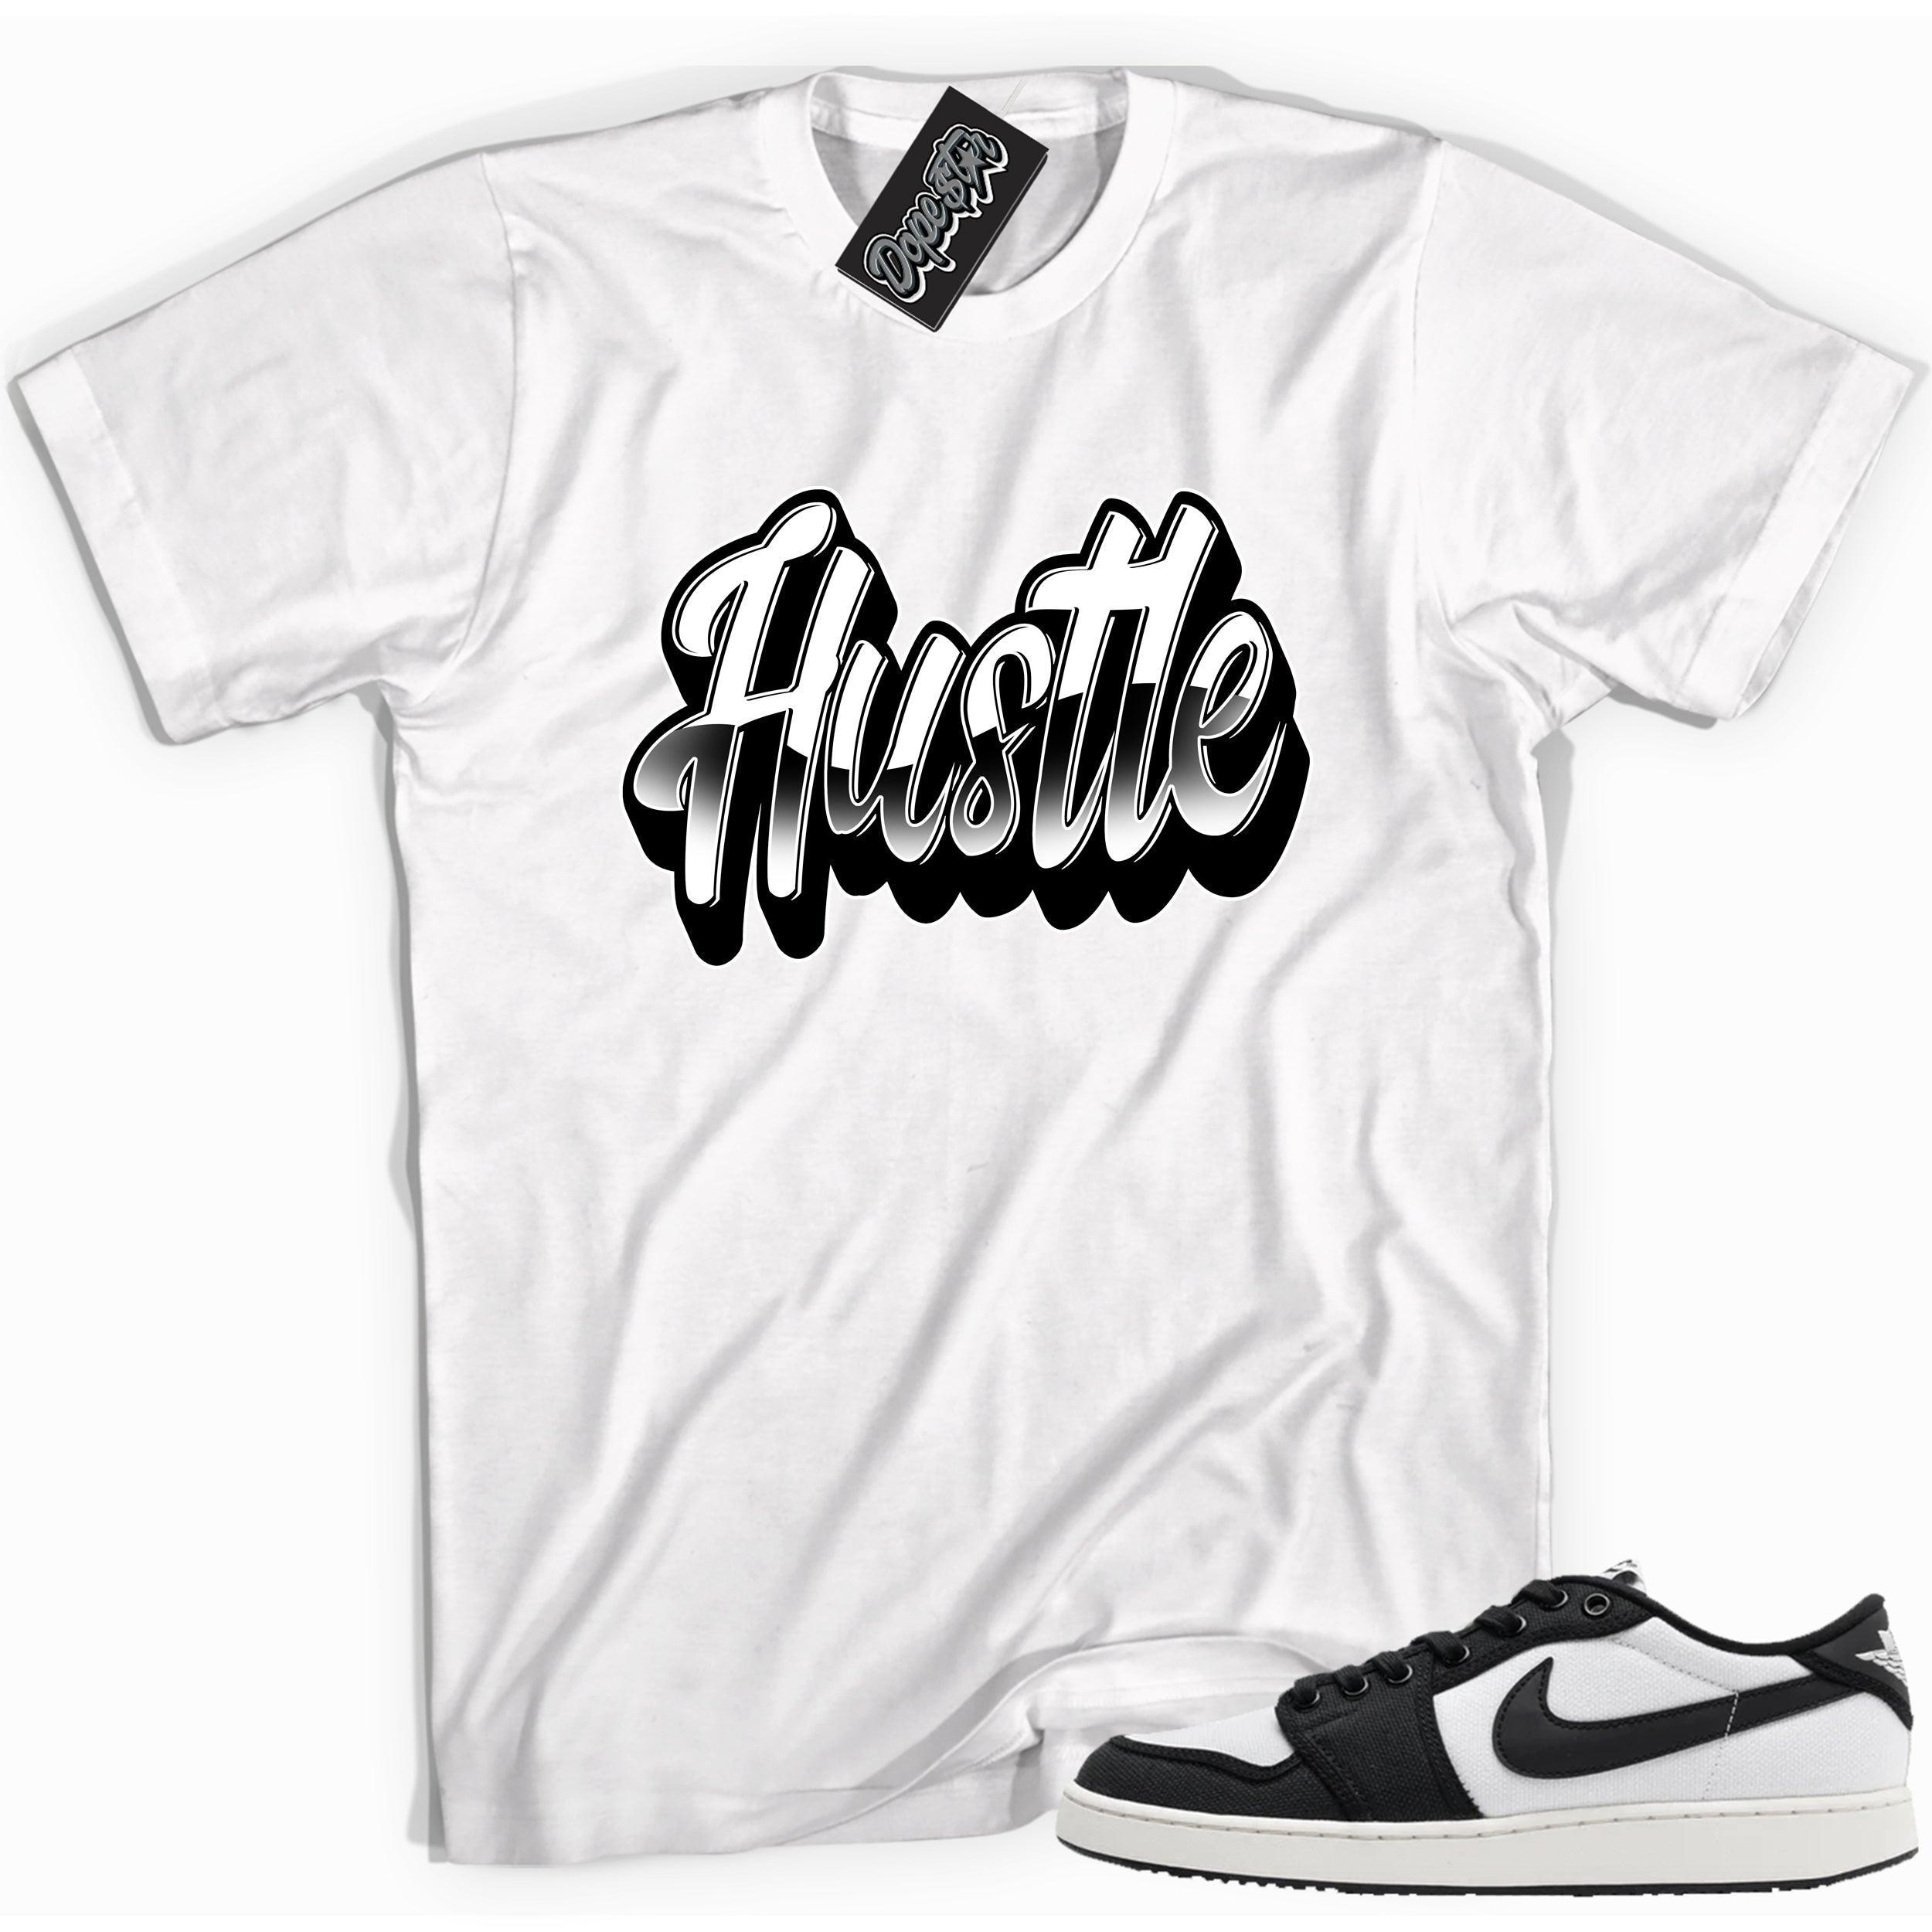 Cool white graphic tee with 'hustle' print, that perfectly matches Air Jordan 1 Retro Ajko Low Black & White sneakers.